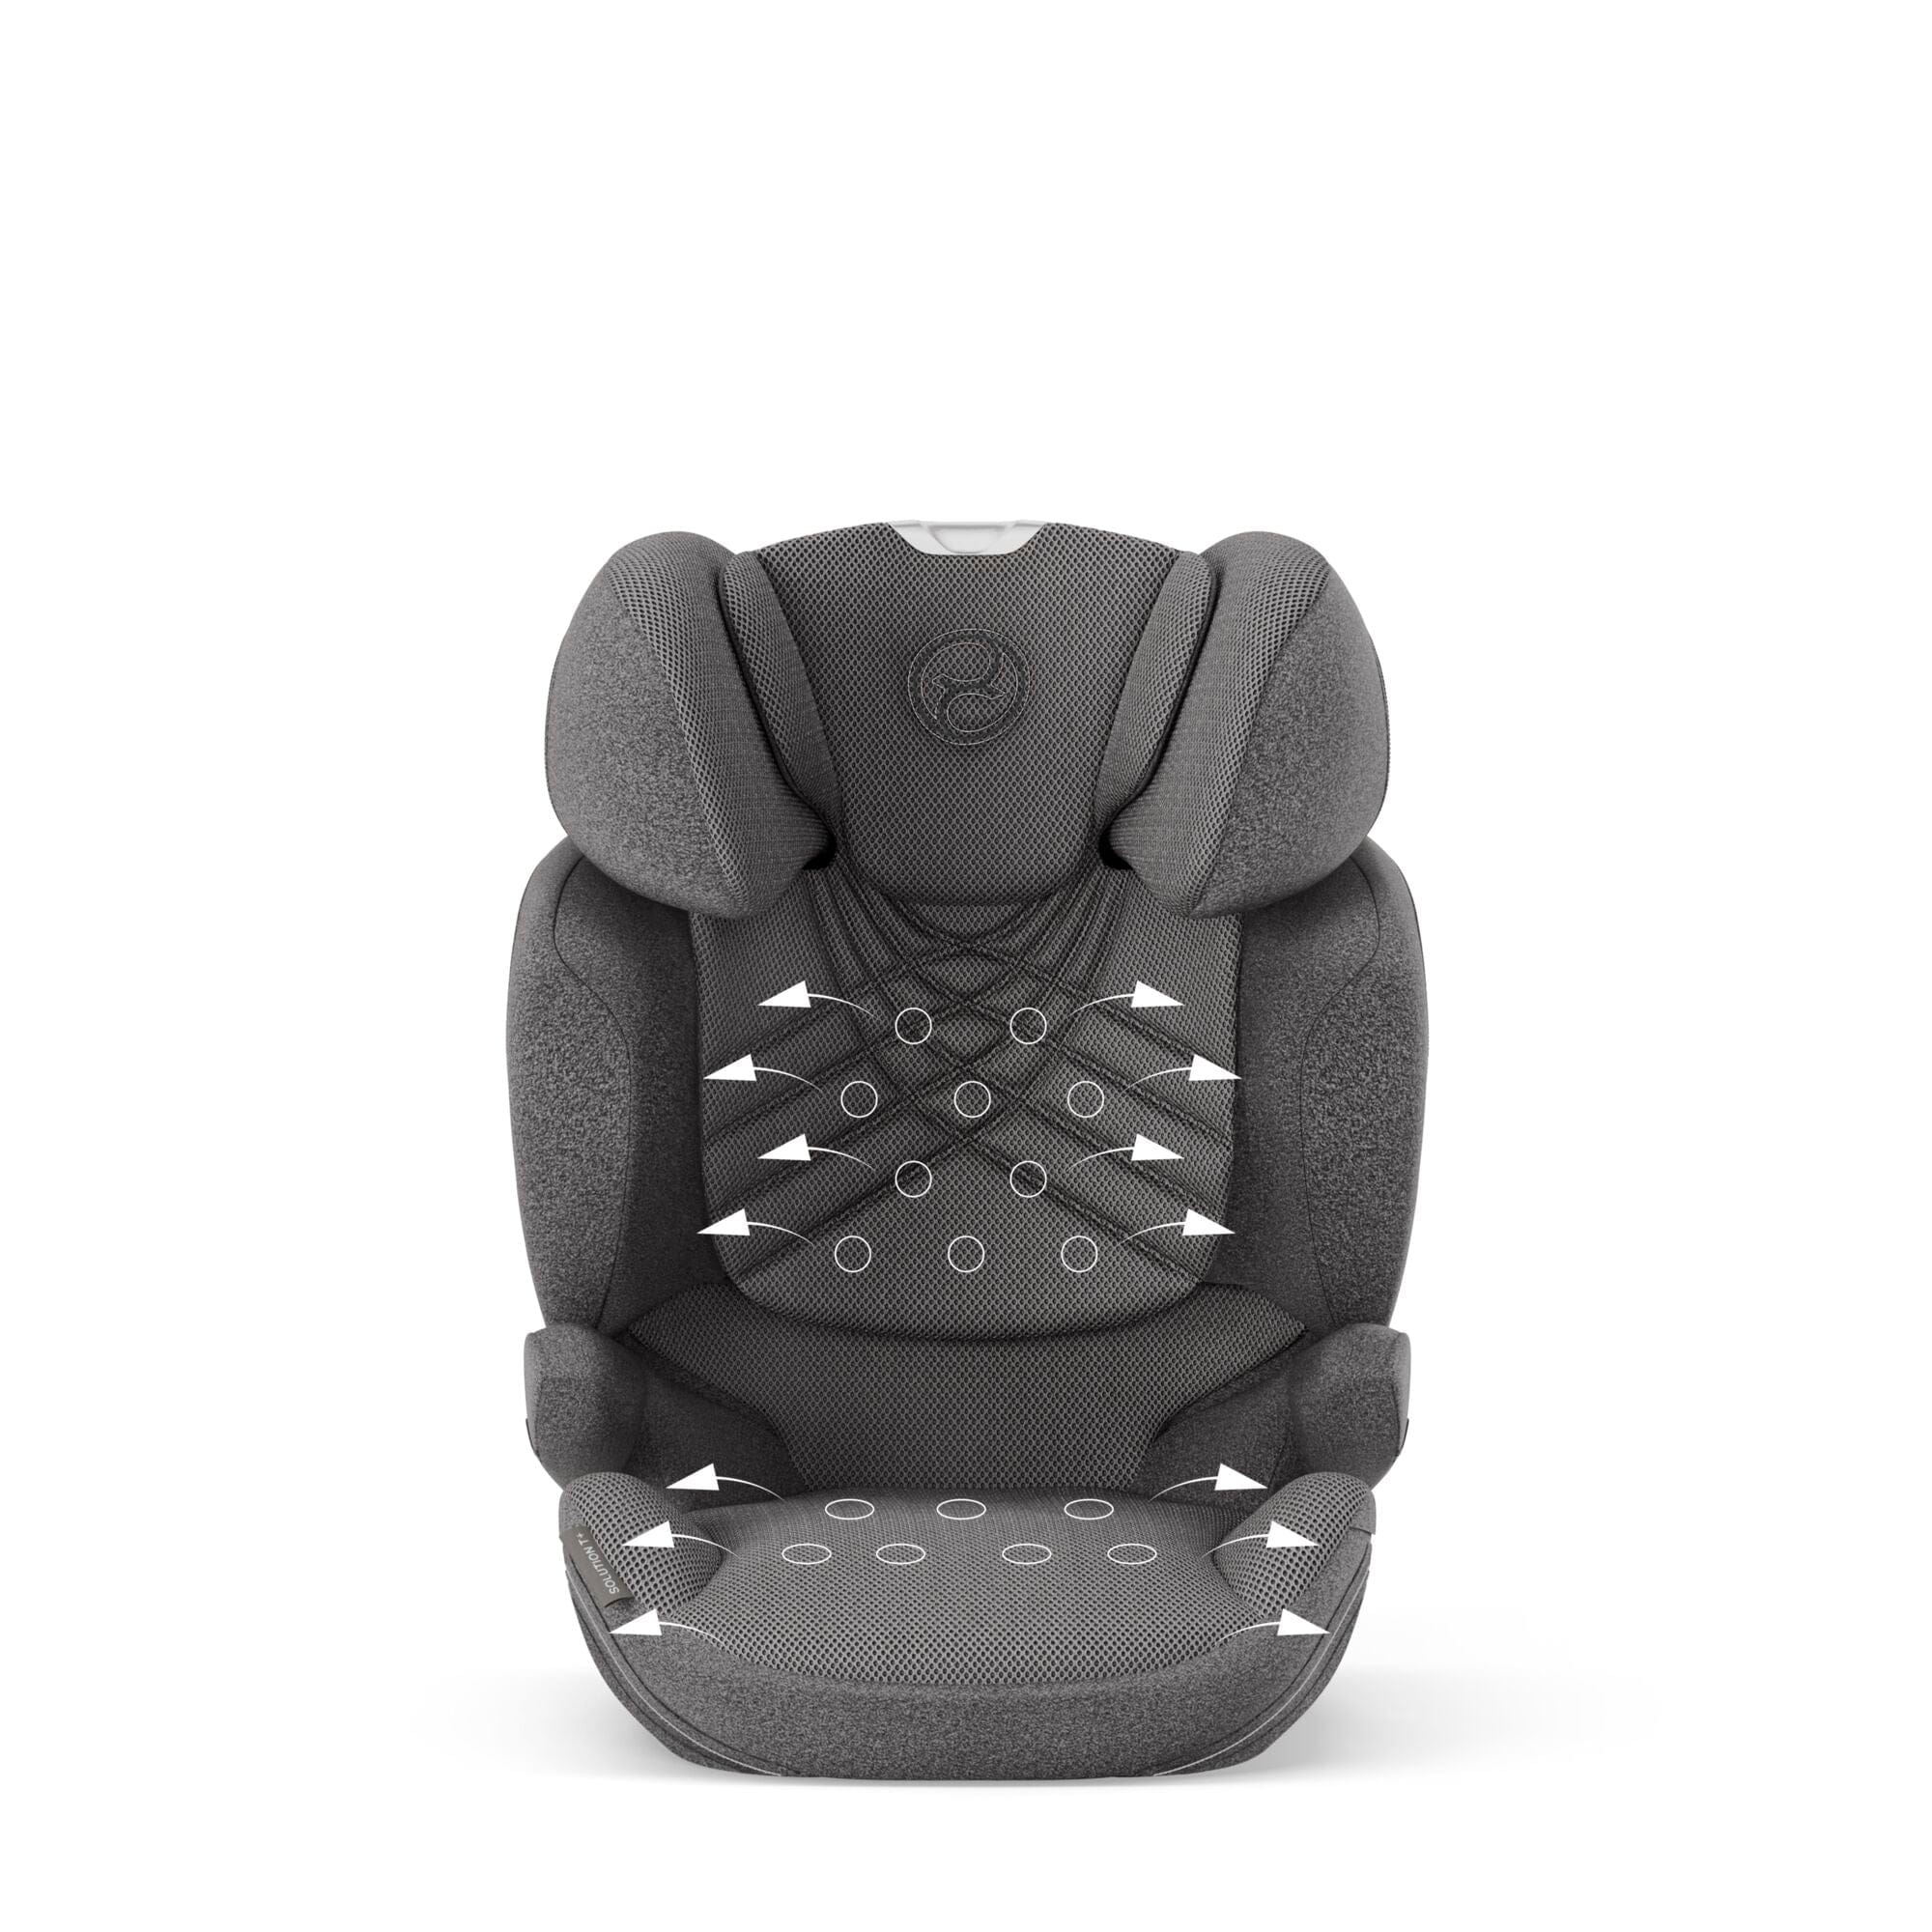 Cybex Solution T i-Fix Plus in Mirage Grey Highback Booster Seats 522004108 4063846380237